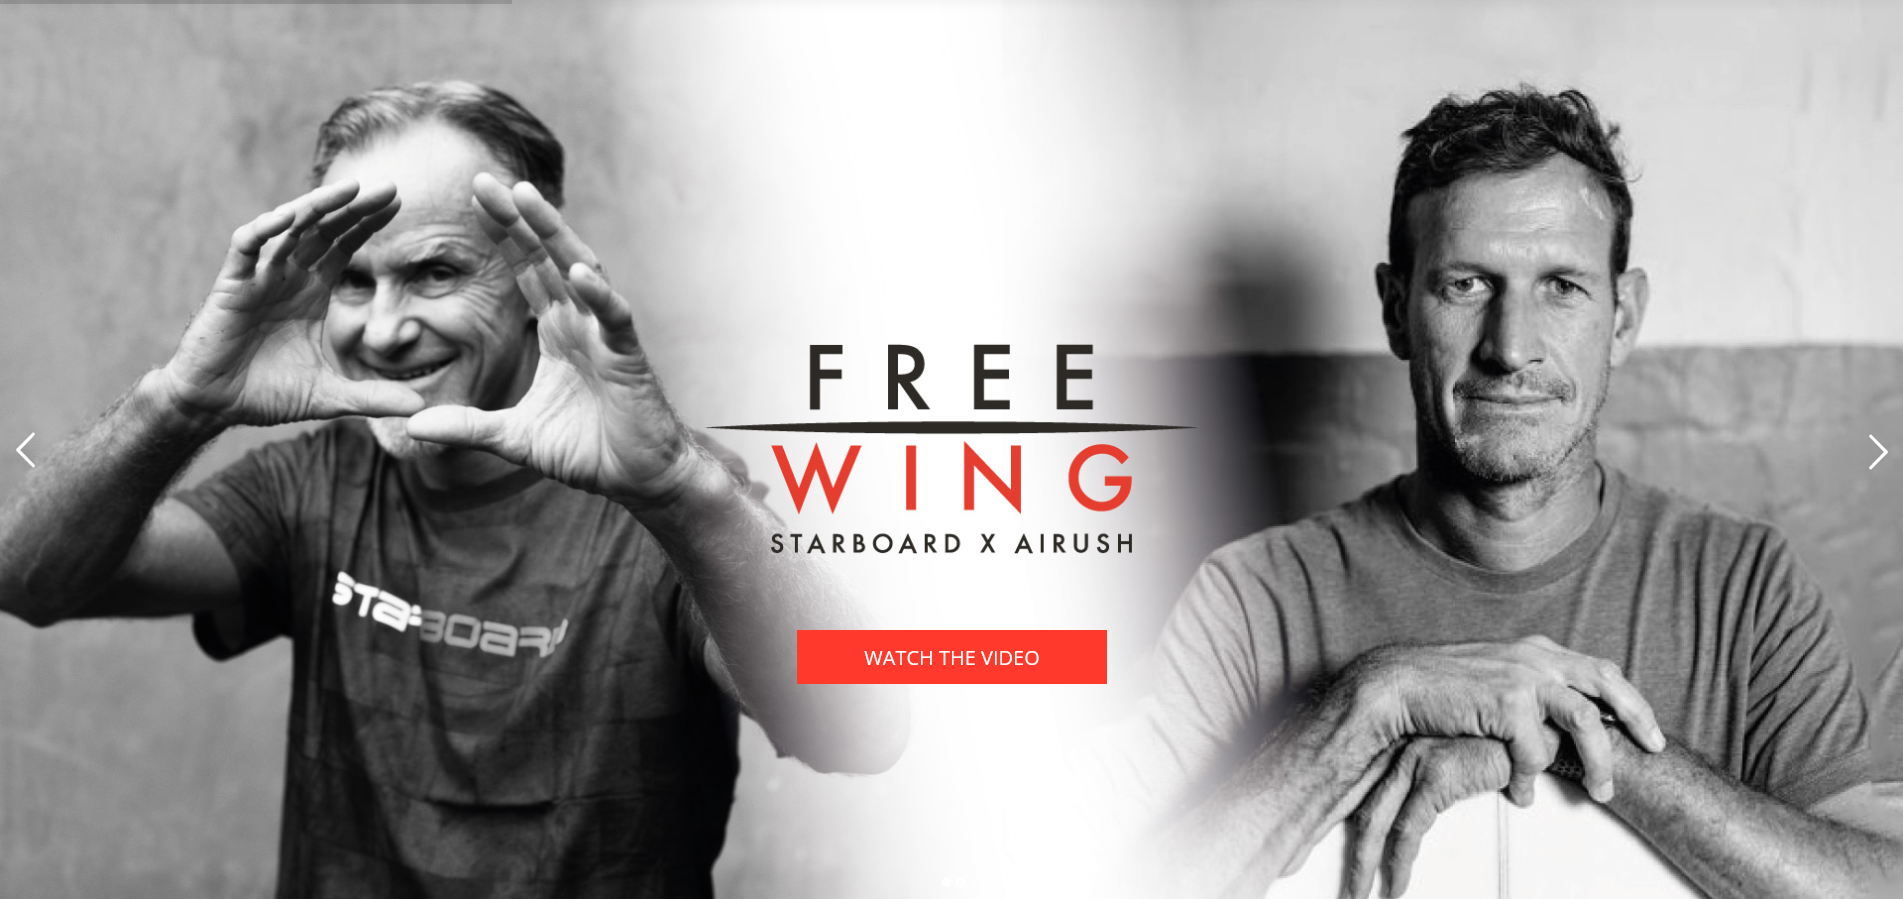 Home - FreeWing by Starboard x Airush